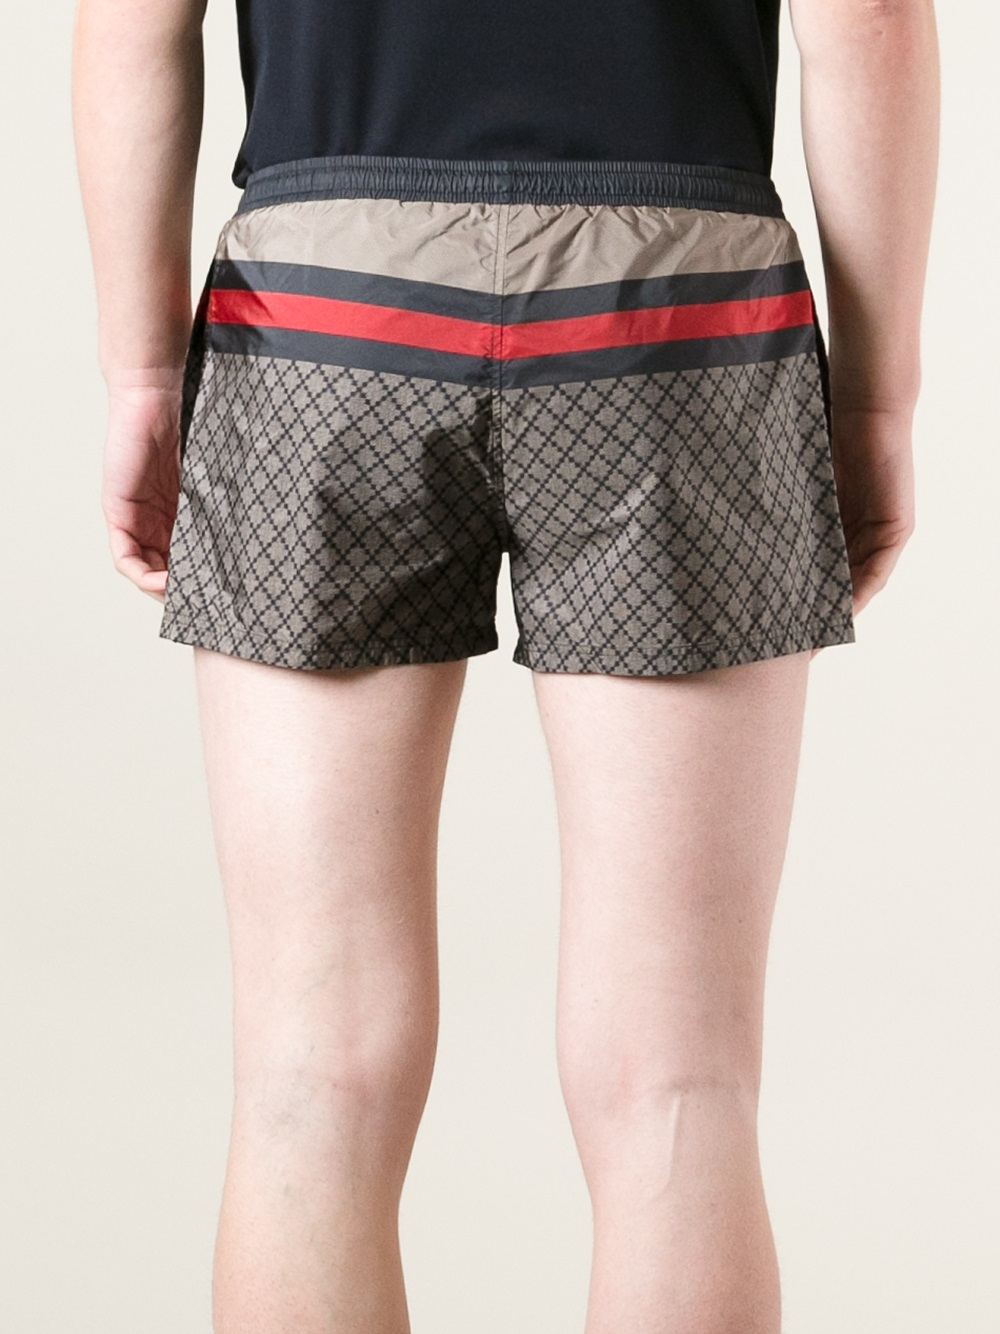 Gucci Printed Swim Shorts in Black for Men - Lyst